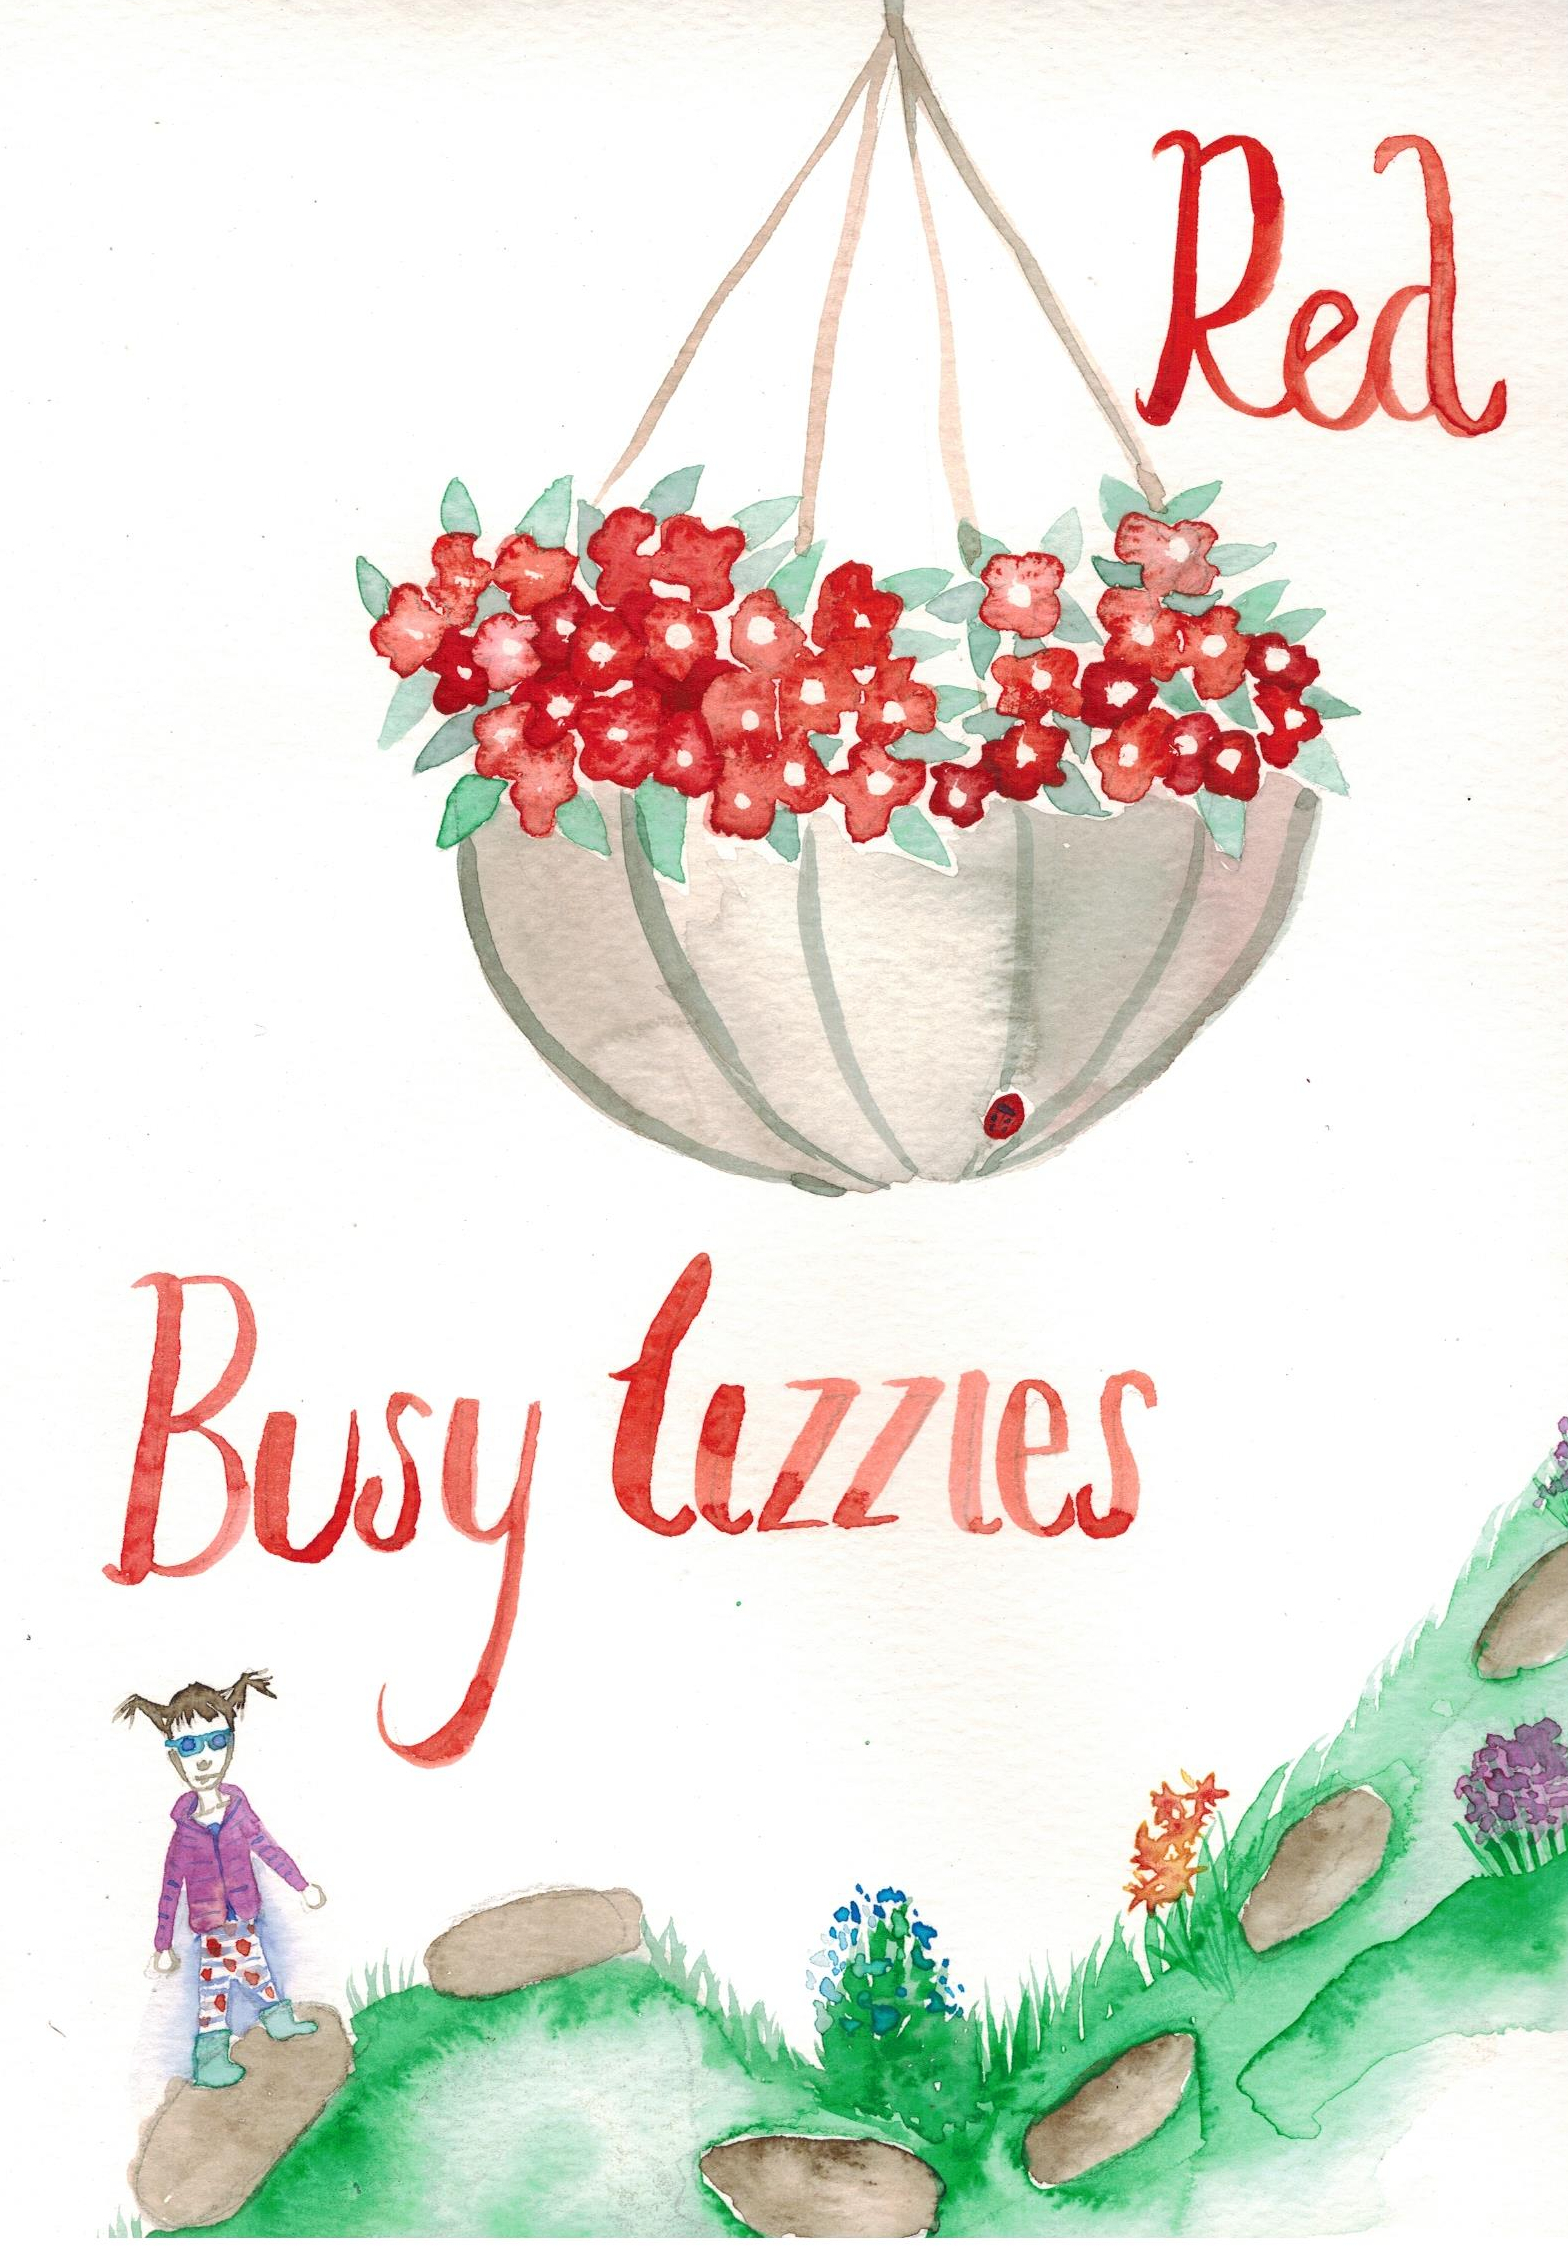 busy lizzy illustration